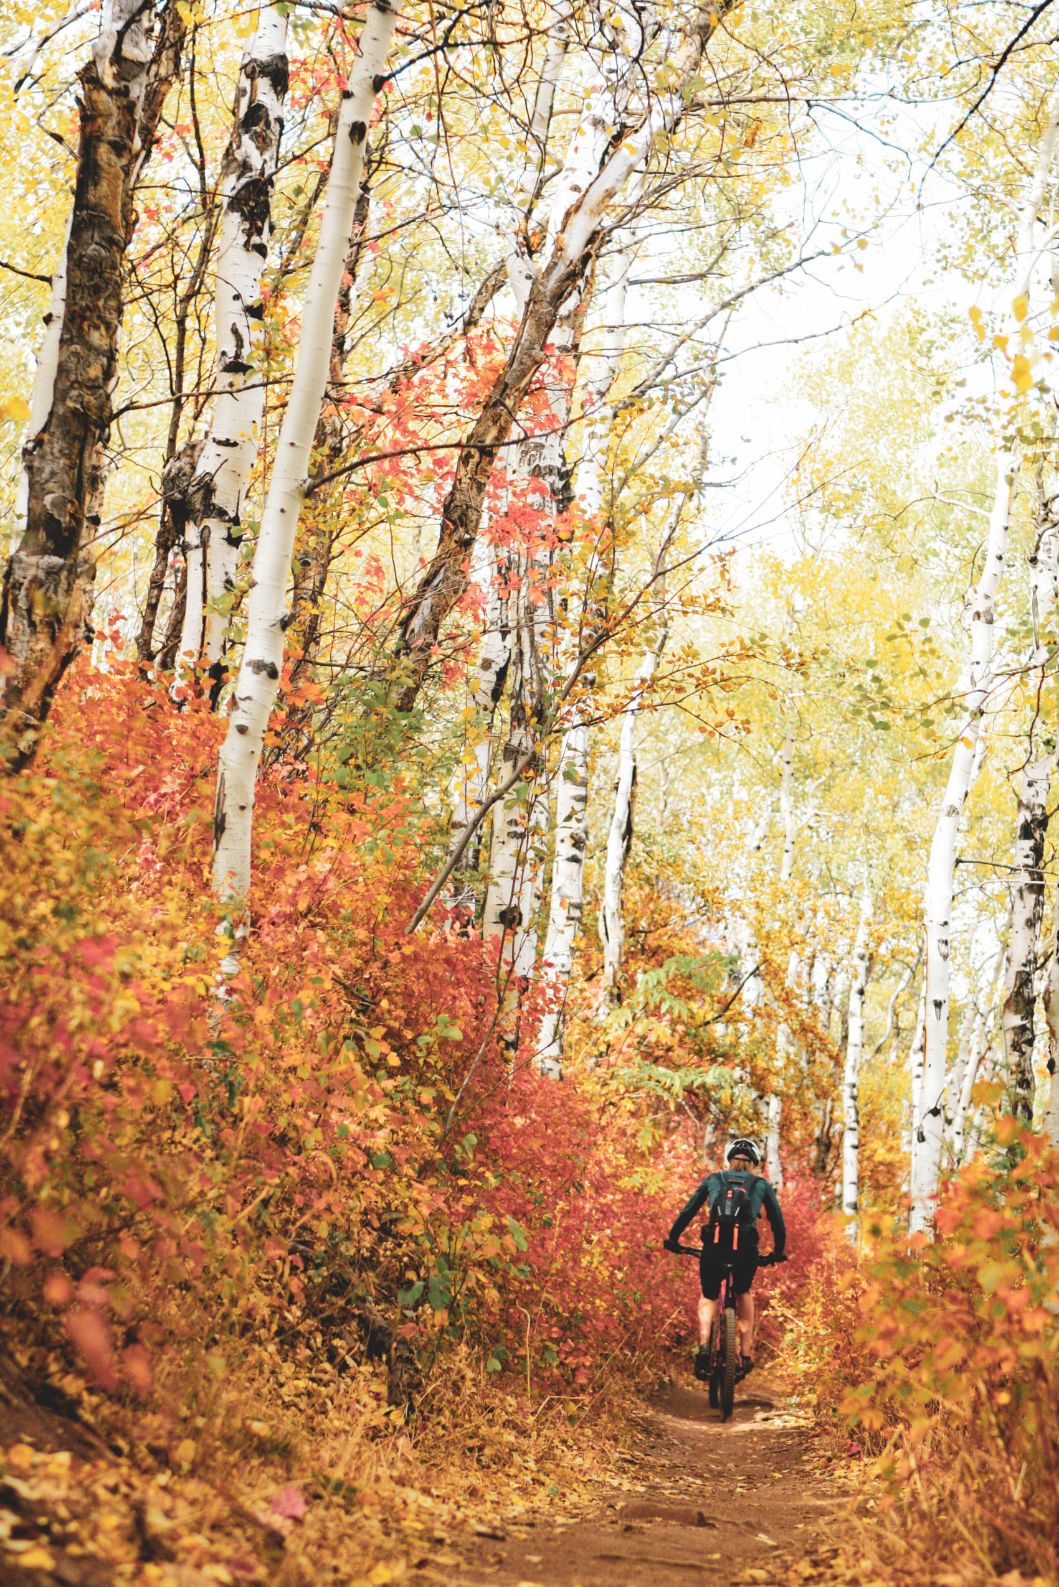 Mountain Biker Peddling on a Trail Surrounded by Aspens with Changing Yellow, Orange, and Red Leaves